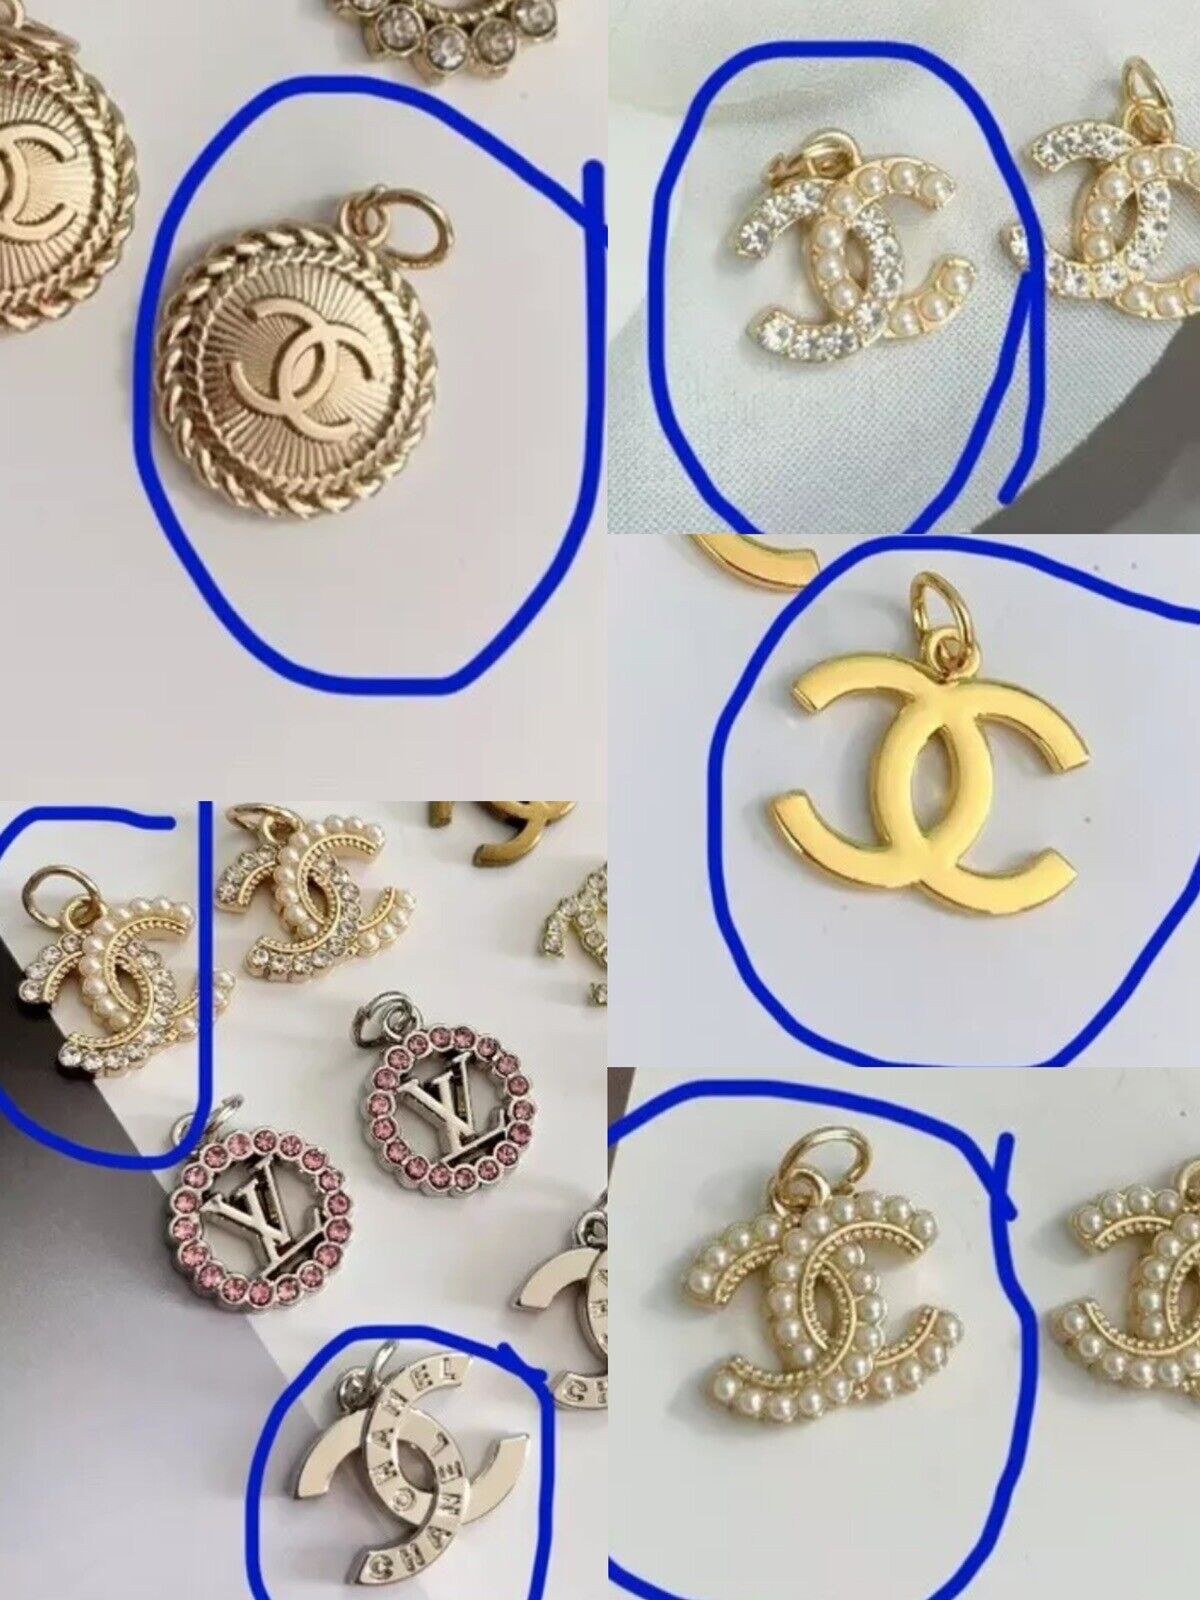 Lot of 6 Chanel buttons and zipper Pulls